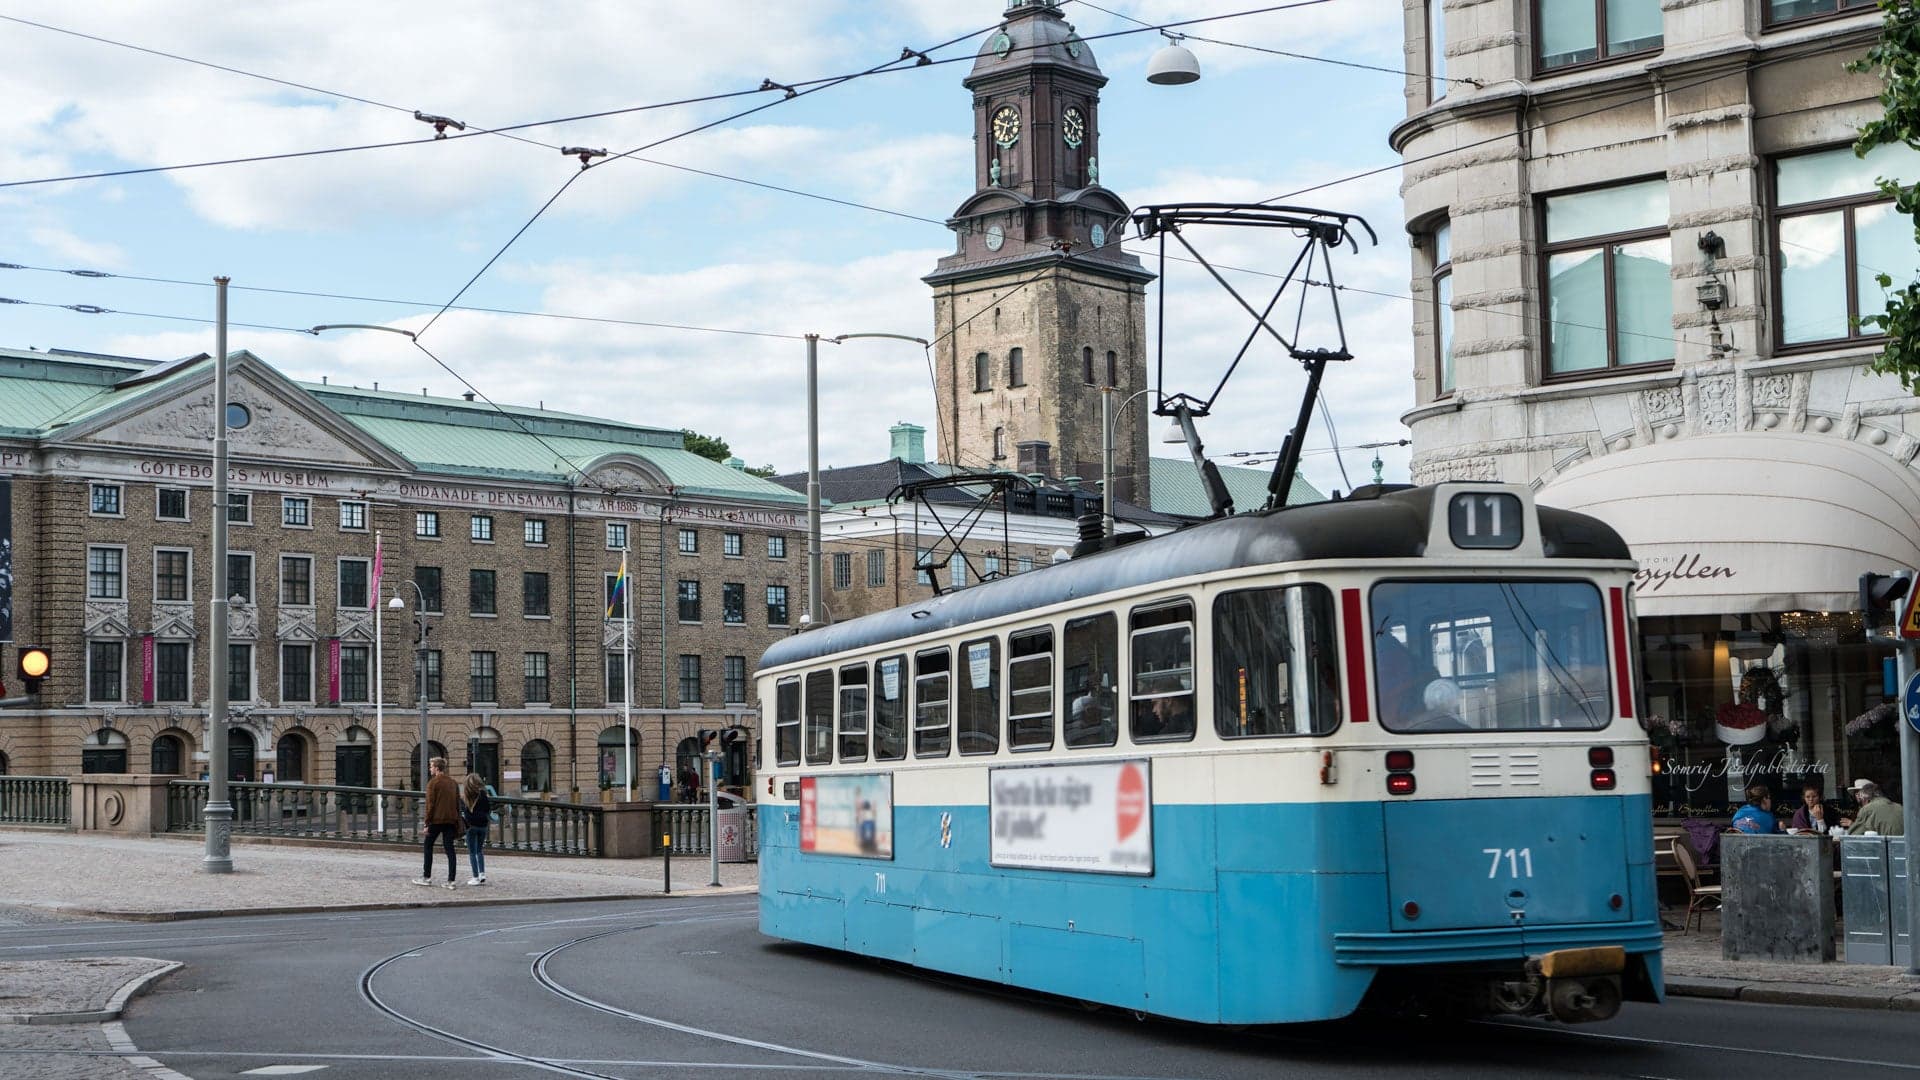 The Drive’s City Guide to Gothenburg